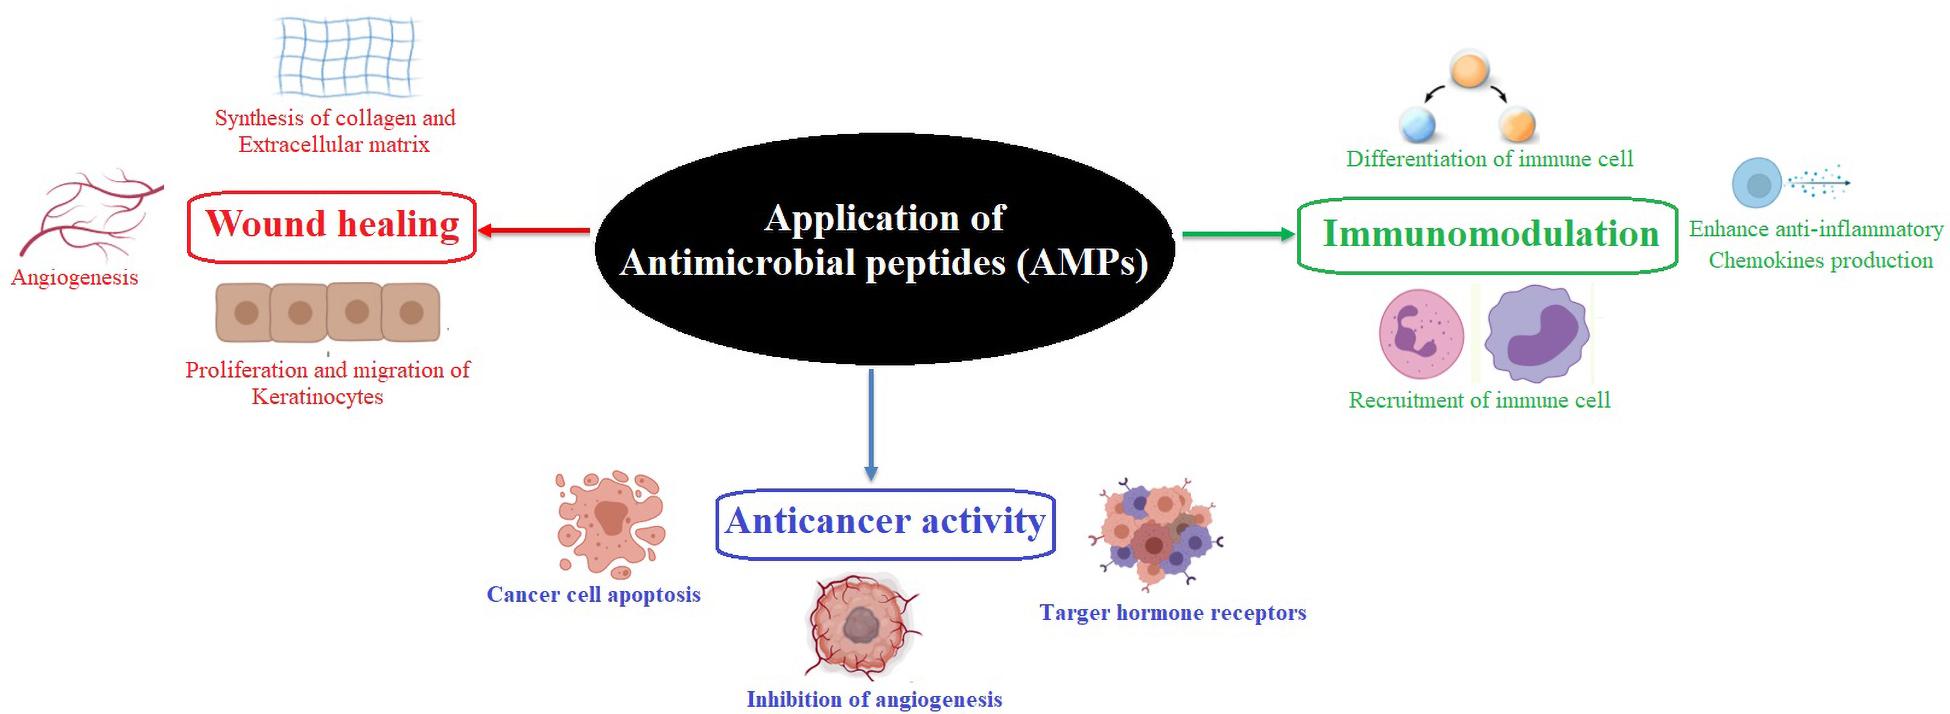 Frontiers | Antimicrobial Peptides: Novel Source and Biological